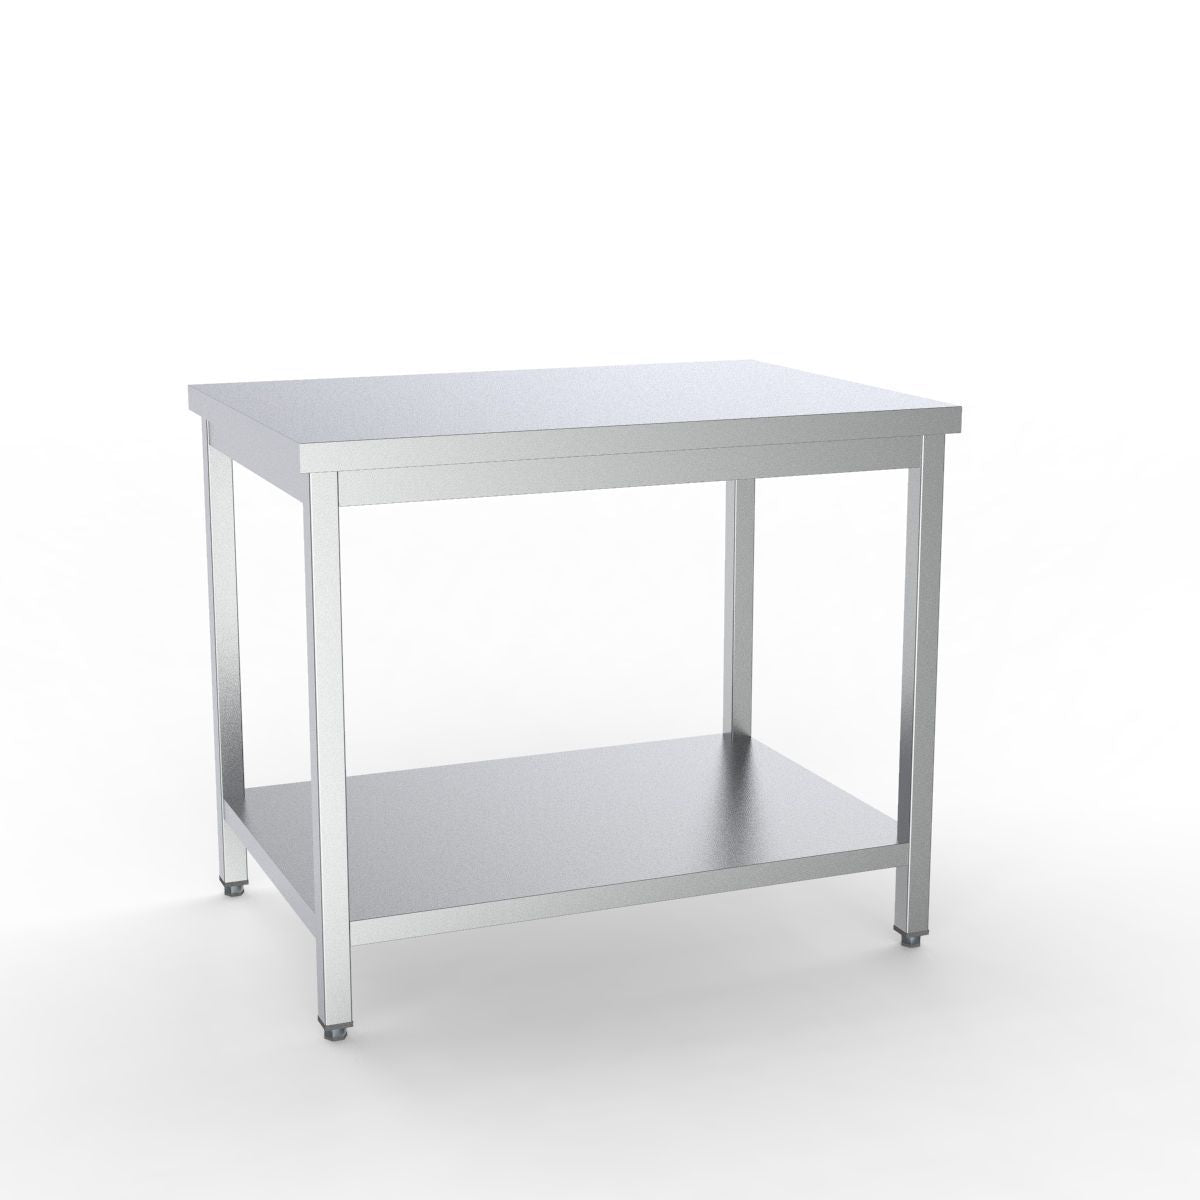 Combisteel Full 430 Stainless Steel 700 Line Worktable With Shelf 2000mm Wide - 7333.0088